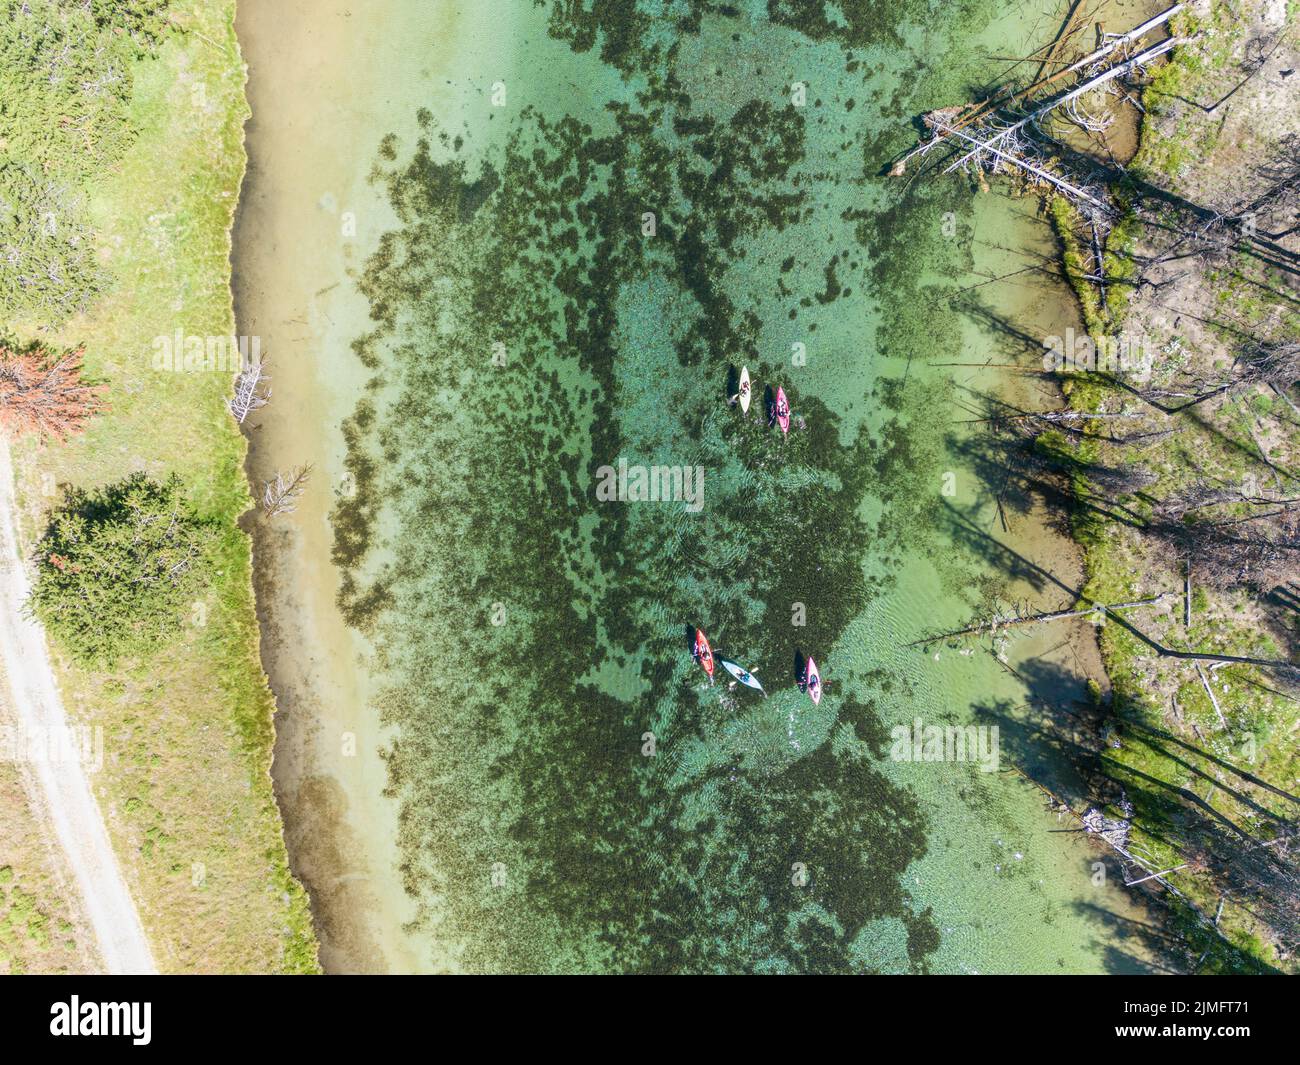 Group of people kayaking Spring Creek, a cristal clear river in Southern Oregon Stock Photo